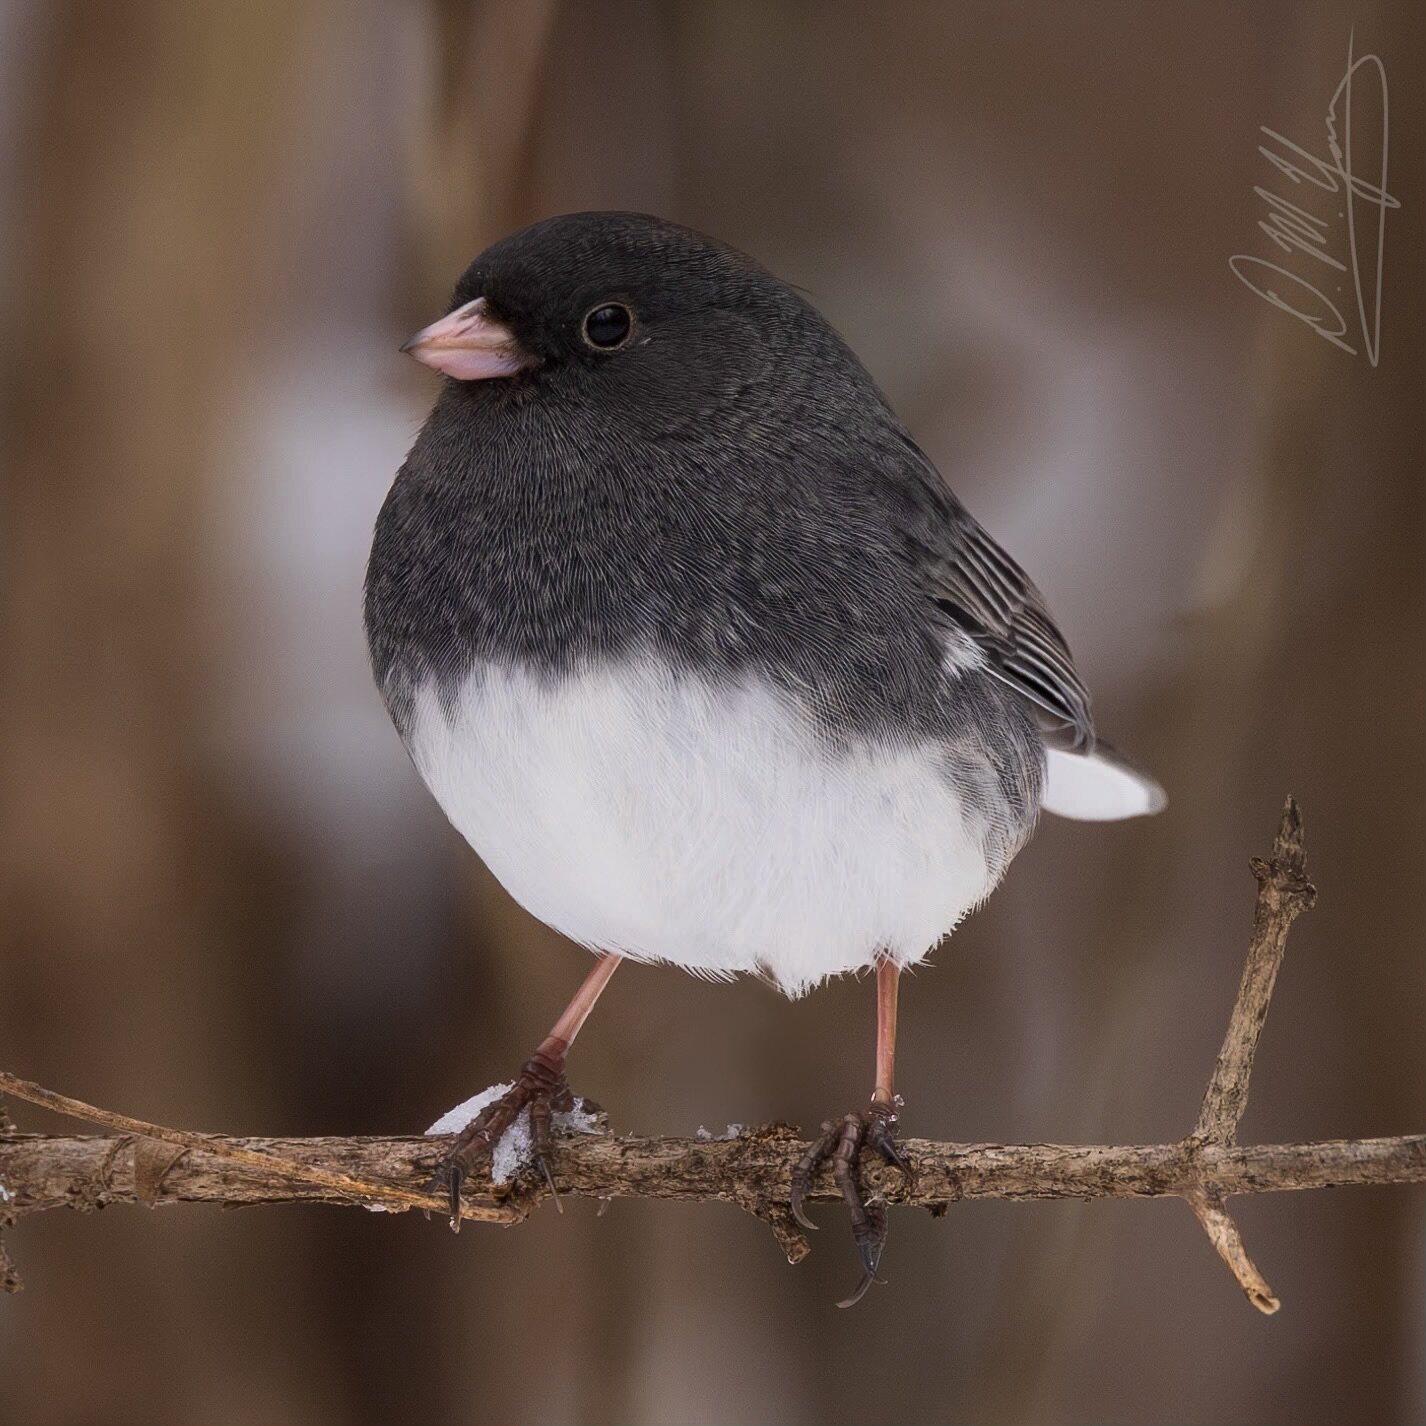 Cute little Dark-eyed Junco with a little bit of snow from earlier this week. This is one of those species we only get around here in the winter, which makes it kind of special.
_____
#darkeyedjunco #junco #birds #wildbirds #bestbirdshots #birdlovers